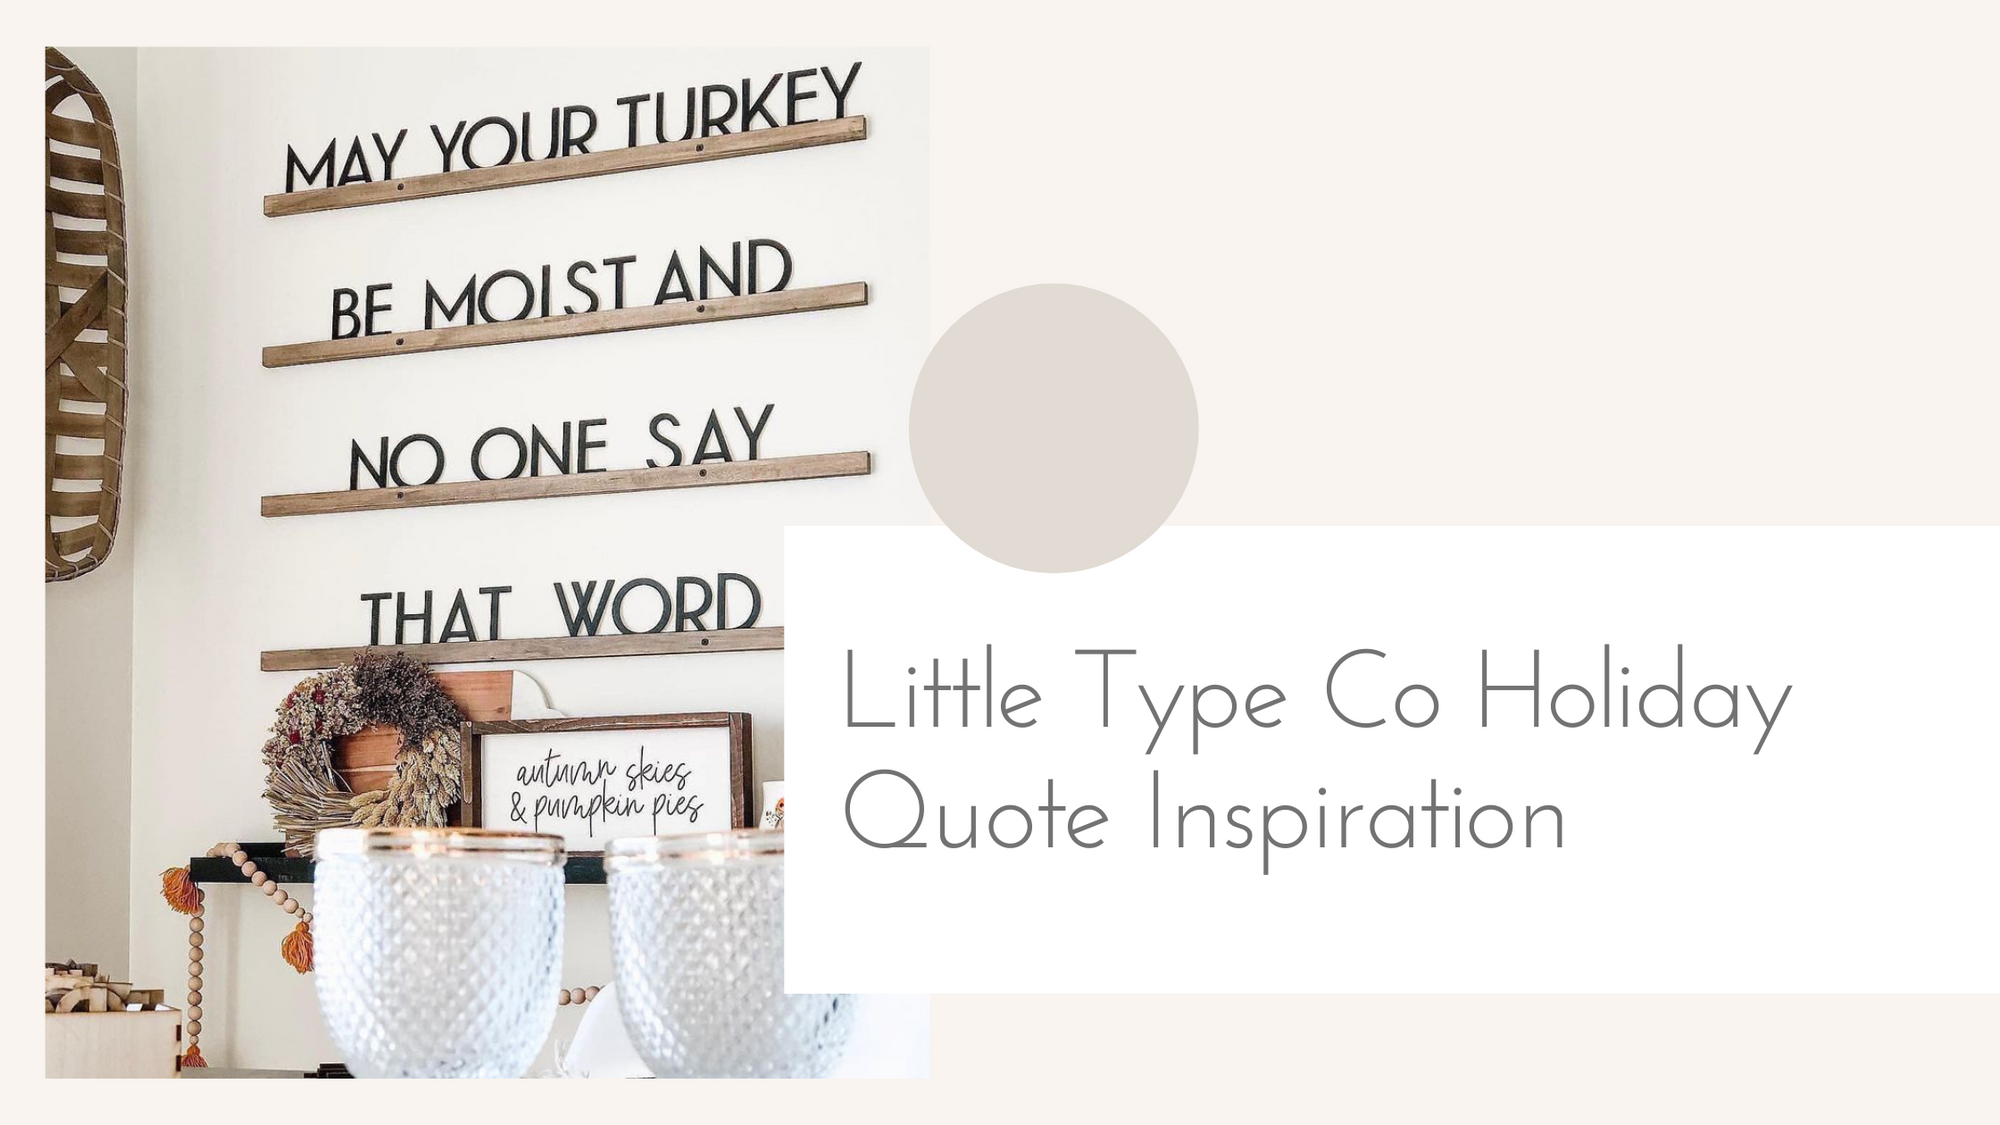 Little Type Co Holiday Quote Inspiration